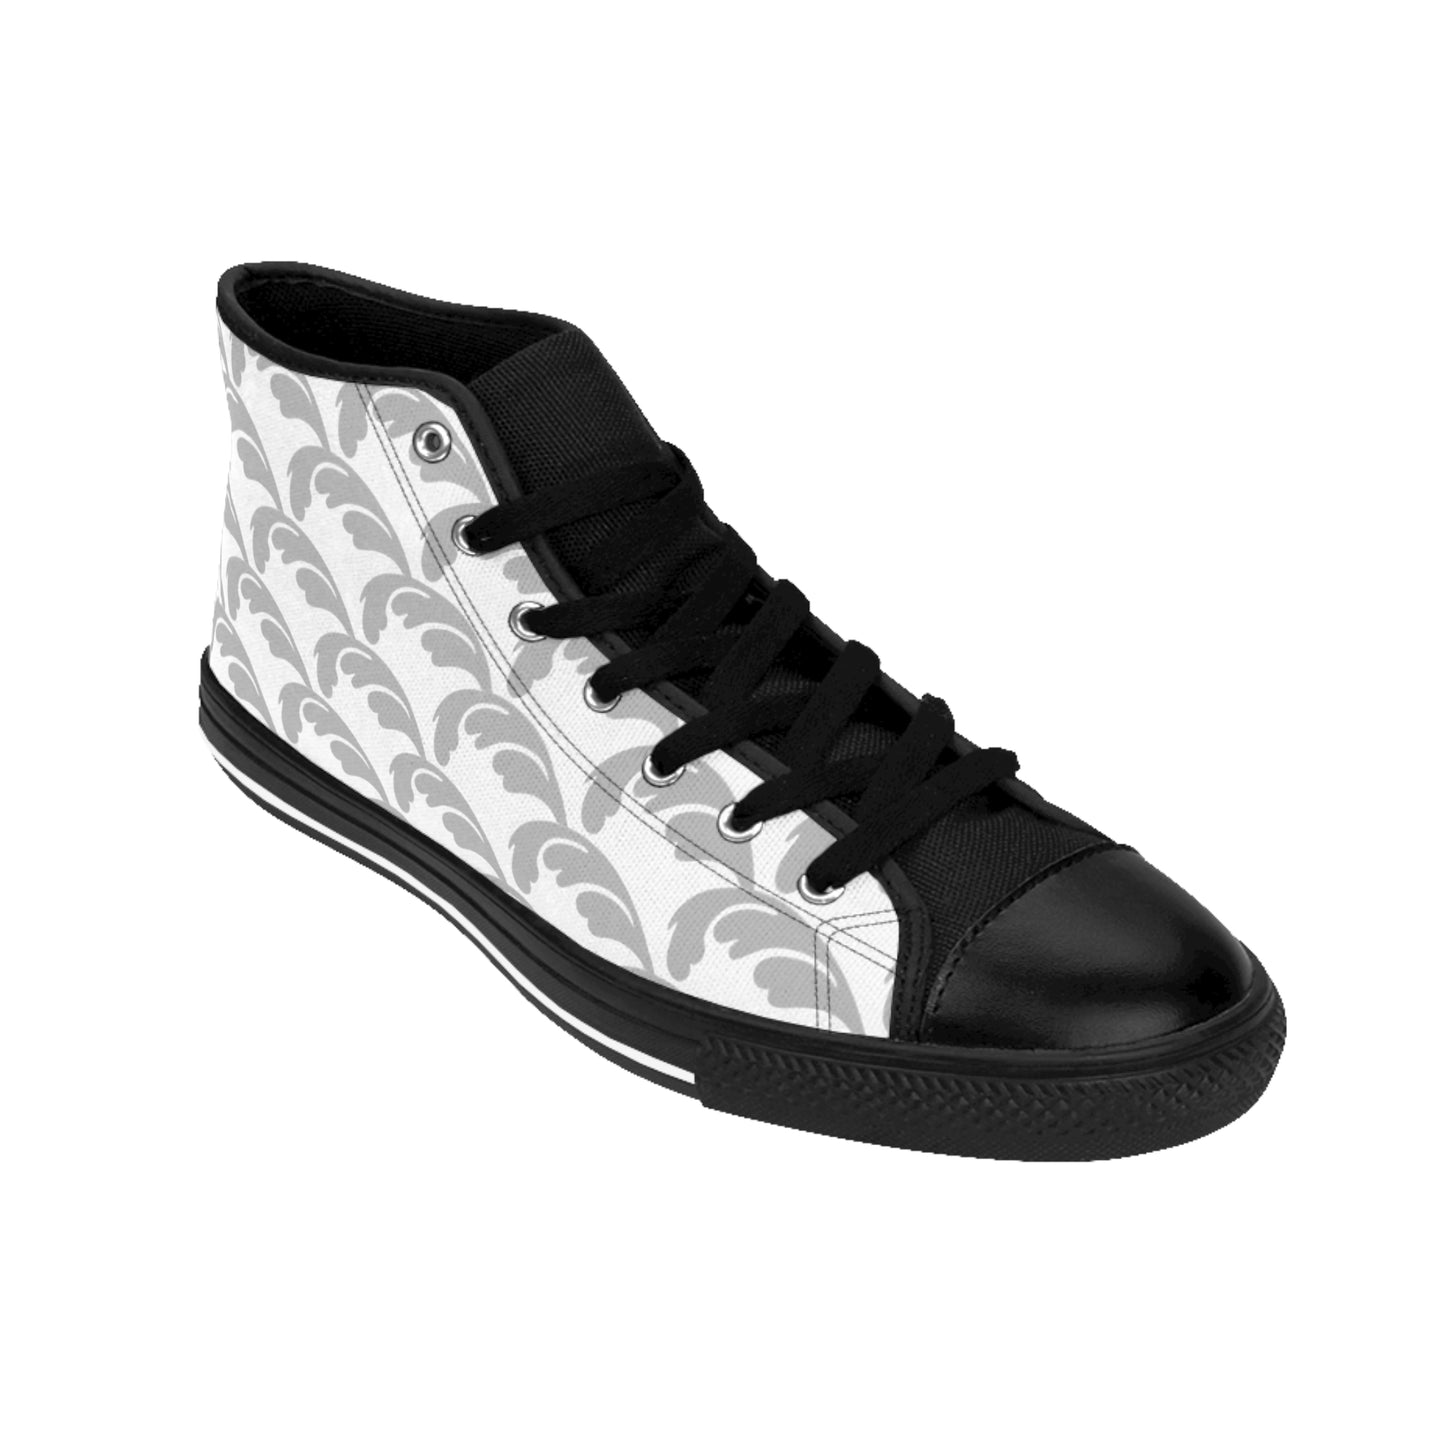 Men's Beautiful Beloved One - High-top Sneakers (wht/silver)